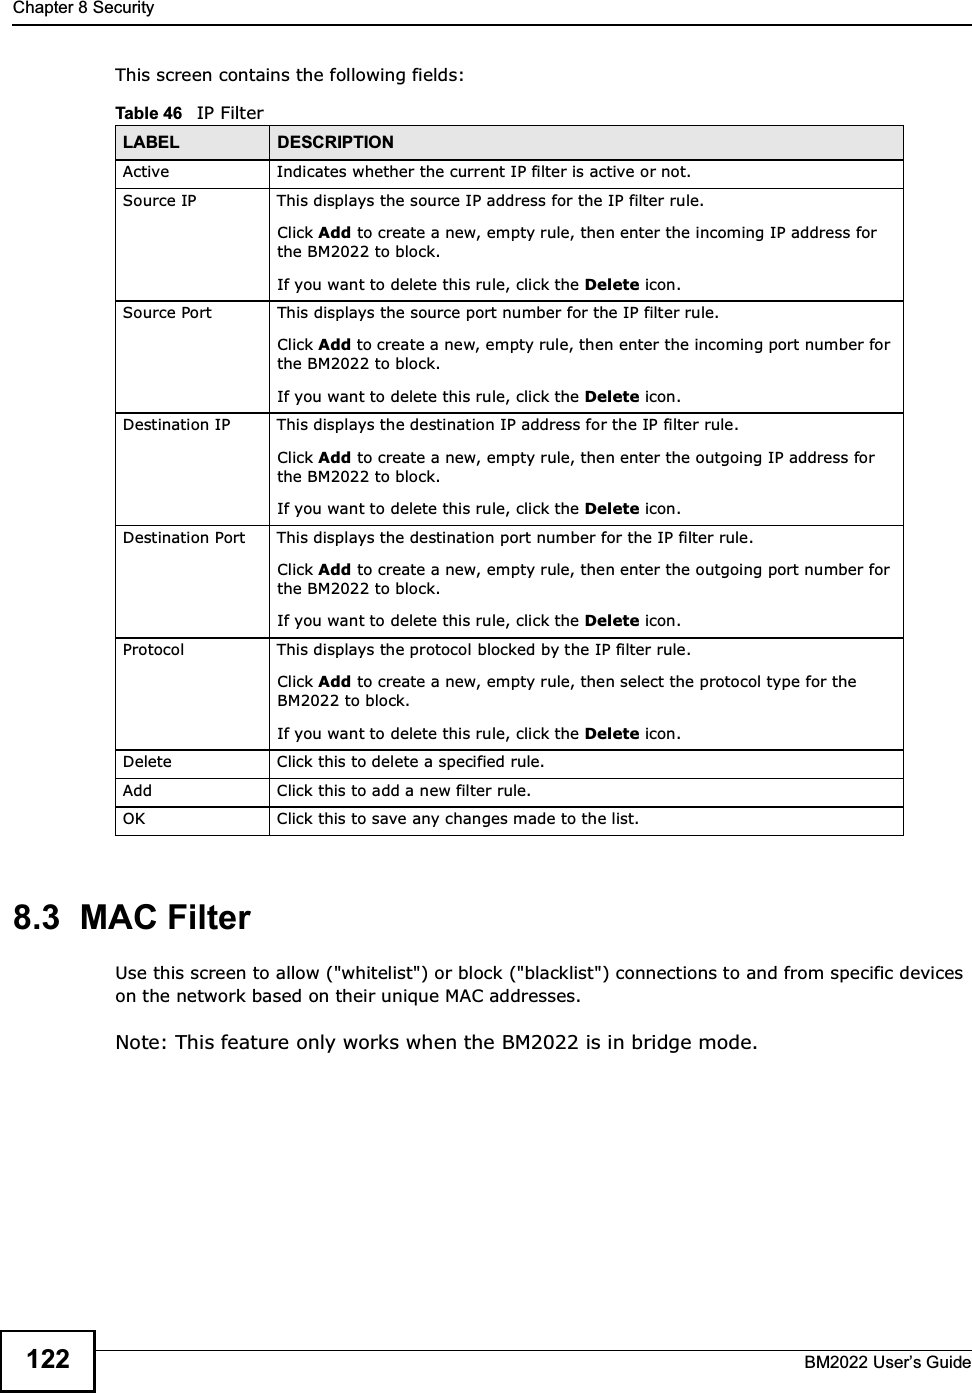 Chapter 8 SecurityBM2022 Users Guide122This screen contains the following fields:8.3  MAC FilterUse this screen to allow (&quot;whitelist&quot;) or block (&quot;blacklist&quot;) connections to and from specific devices on the network based on their unique MAC addresses.Note: This feature only works when the BM2022 is in bridge mode.Table 46   IP FilterLABEL DESCRIPTIONActive Indicates whether the current IP filter is active or not.Source IP This displays the source IP address for the IP filter rule.Click Add to create a new, empty rule, then enter the incoming IP address for the BM2022 to block.If you want to delete this rule, click the Delete icon.Source Port This displays the source port number for the IP filter rule.Click Add to create a new, empty rule, then enter the incoming port number for the BM2022 to block.If you want to delete this rule, click the Delete icon.Destination IP This displays the destination IP address for the IP filter rule.Click Add to create a new, empty rule, then enter the outgoing IP address for the BM2022 to block.If you want to delete this rule, click the Delete icon.Destination Port This displays the destination port number for the IP filter rule.Click Add to create a new, empty rule, then enter the outgoing port number for the BM2022 to block.If you want to delete this rule, click the Delete icon.Protocol This displays the protocol blocked by the IP filter rule.Click Add to create a new, empty rule, then select the protocol type for the BM2022 to block.If you want to delete this rule, click the Delete icon.Delete Click this to delete a specified rule.Add Click this to add a new filter rule.OK Click this to save any changes made to the list.